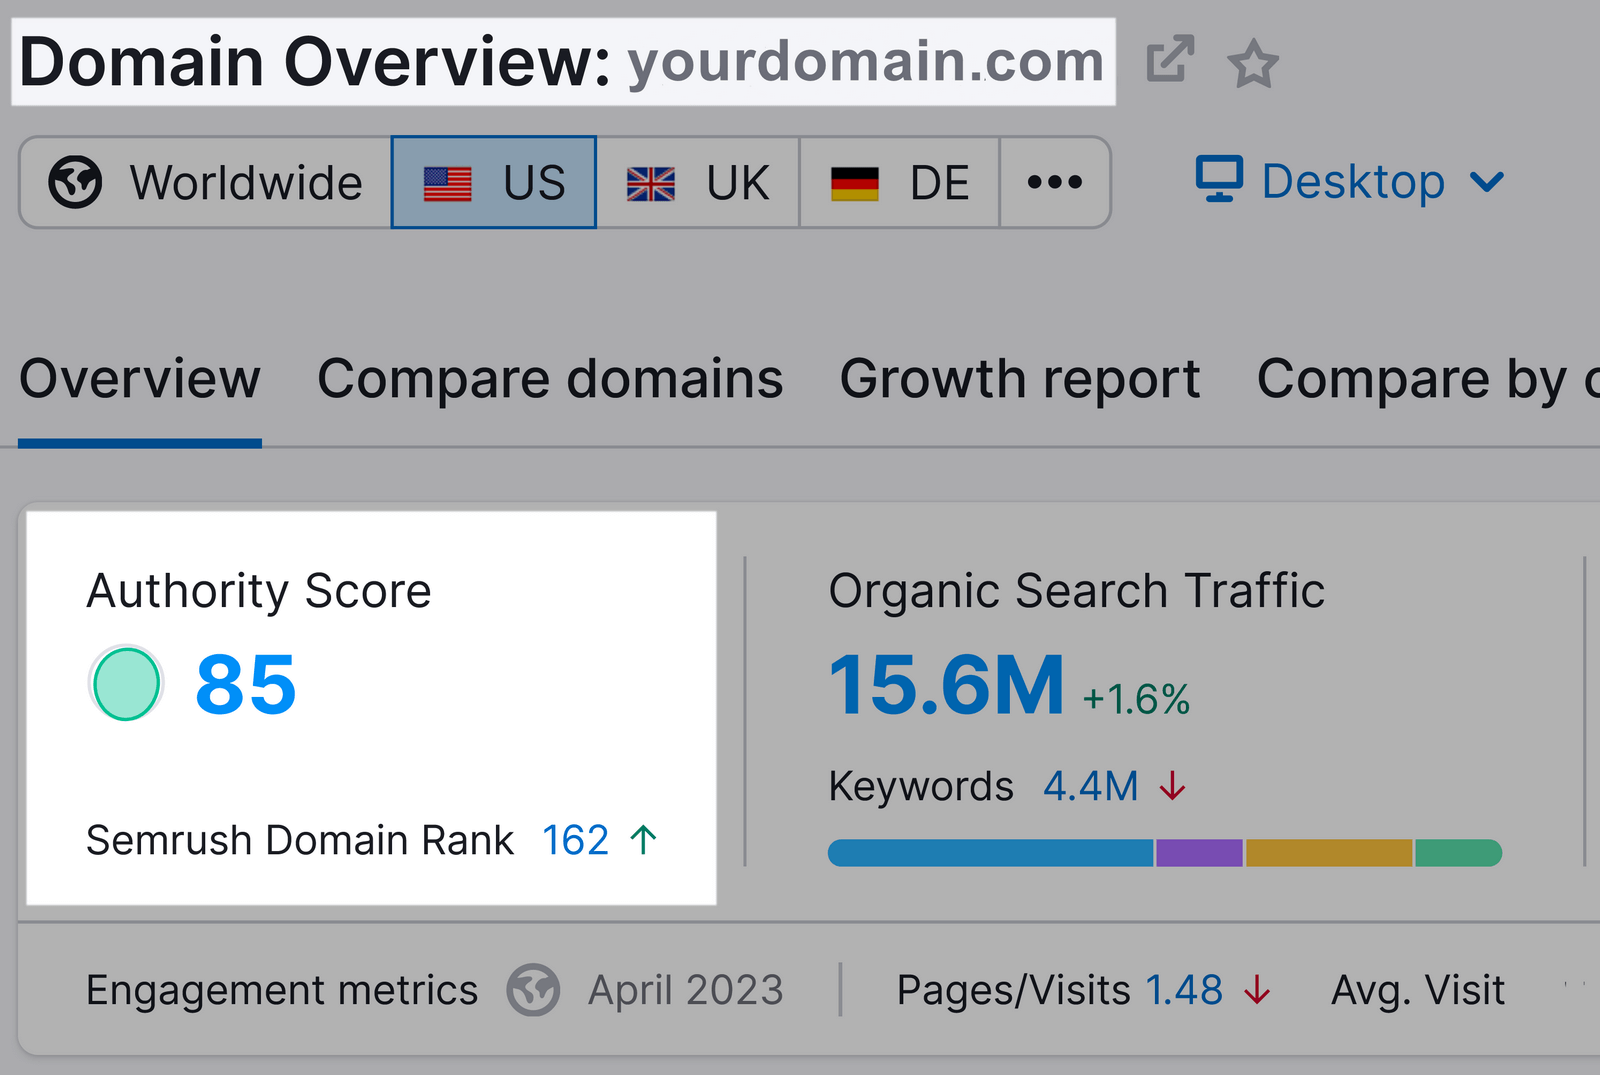 authority people     "85" highlighted successful  Domain Overview tool